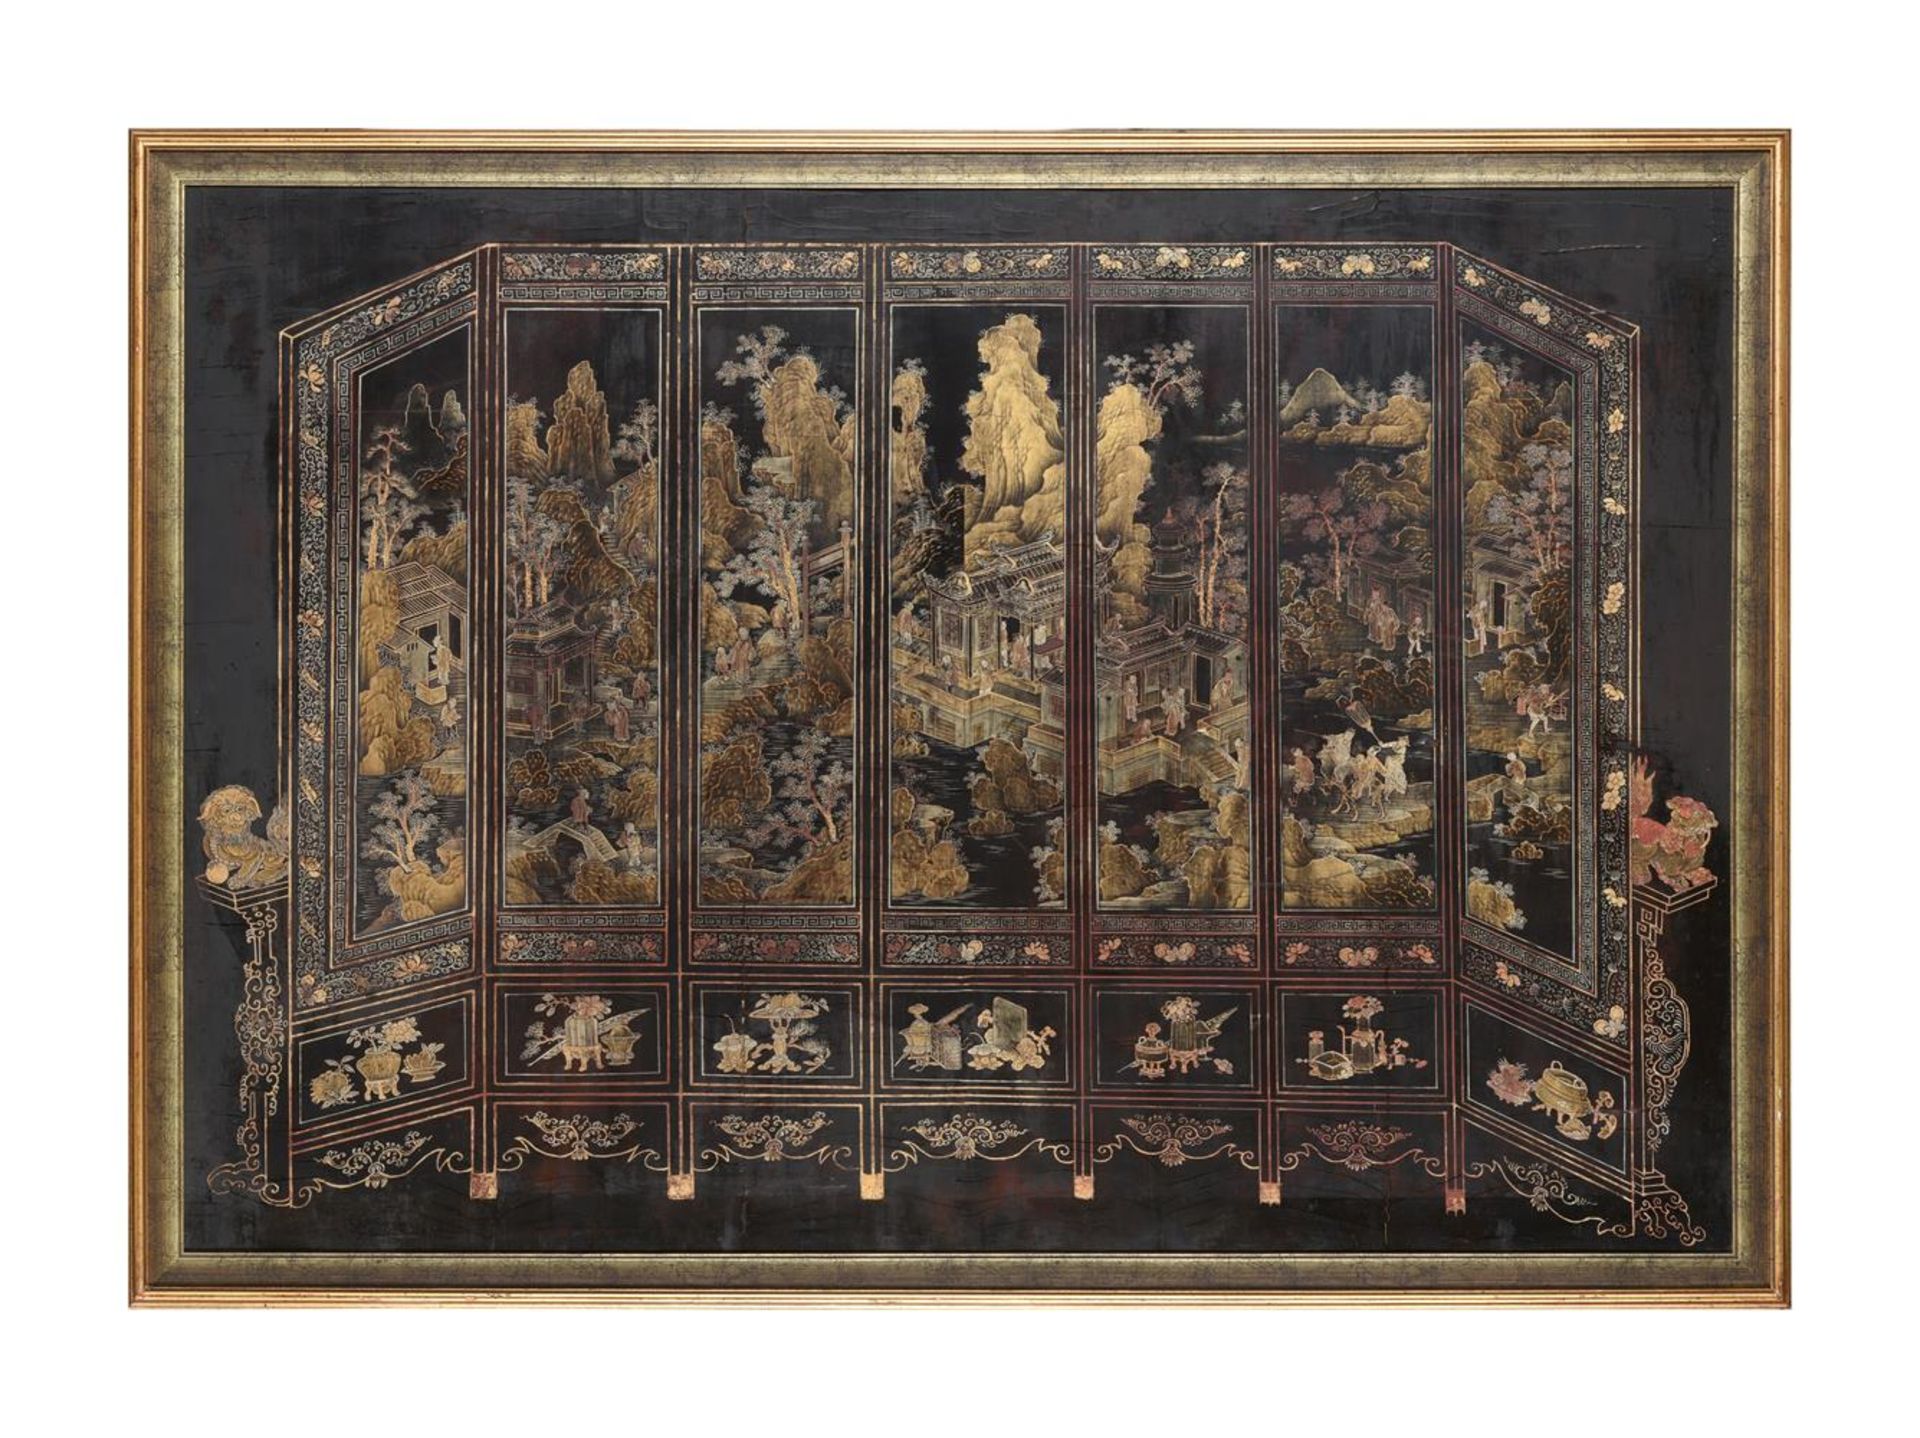 A CHINESE BLACK LAQUER AND GILT DECORATED PANEL, 19TH CENTURY